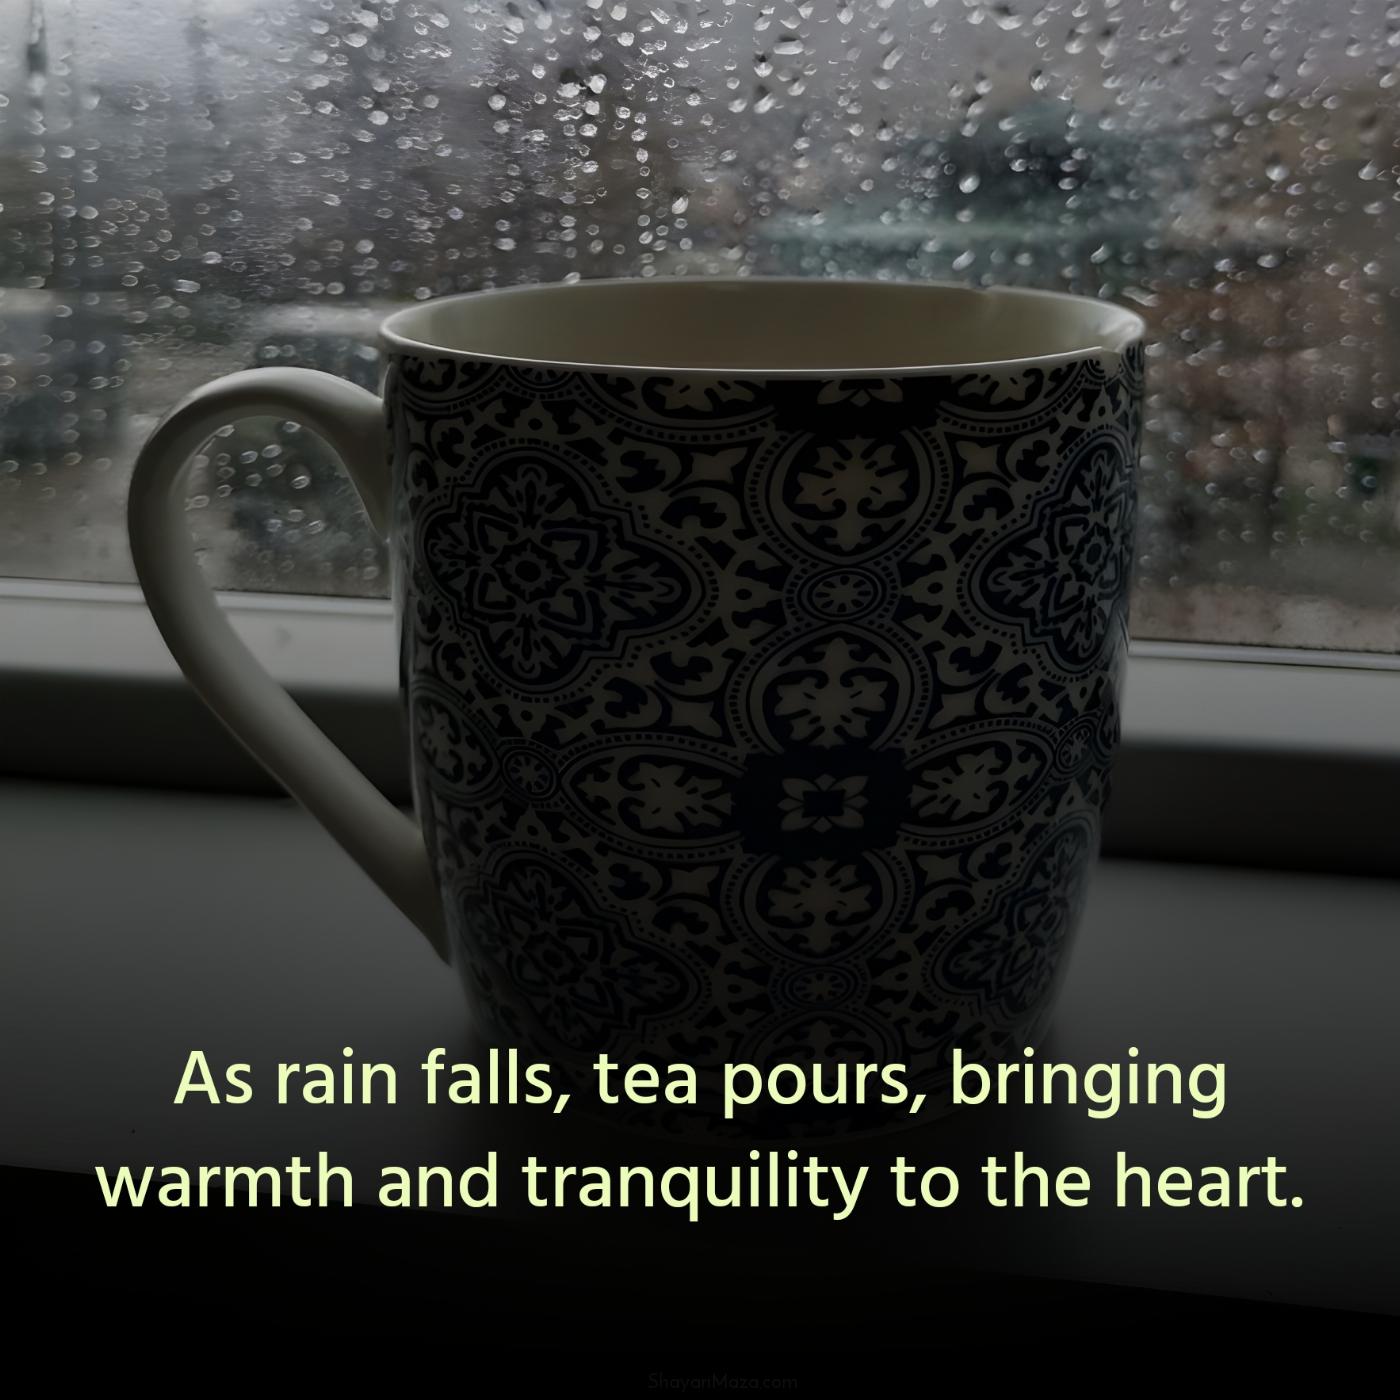 As rain falls tea pours bringing warmth and tranquility